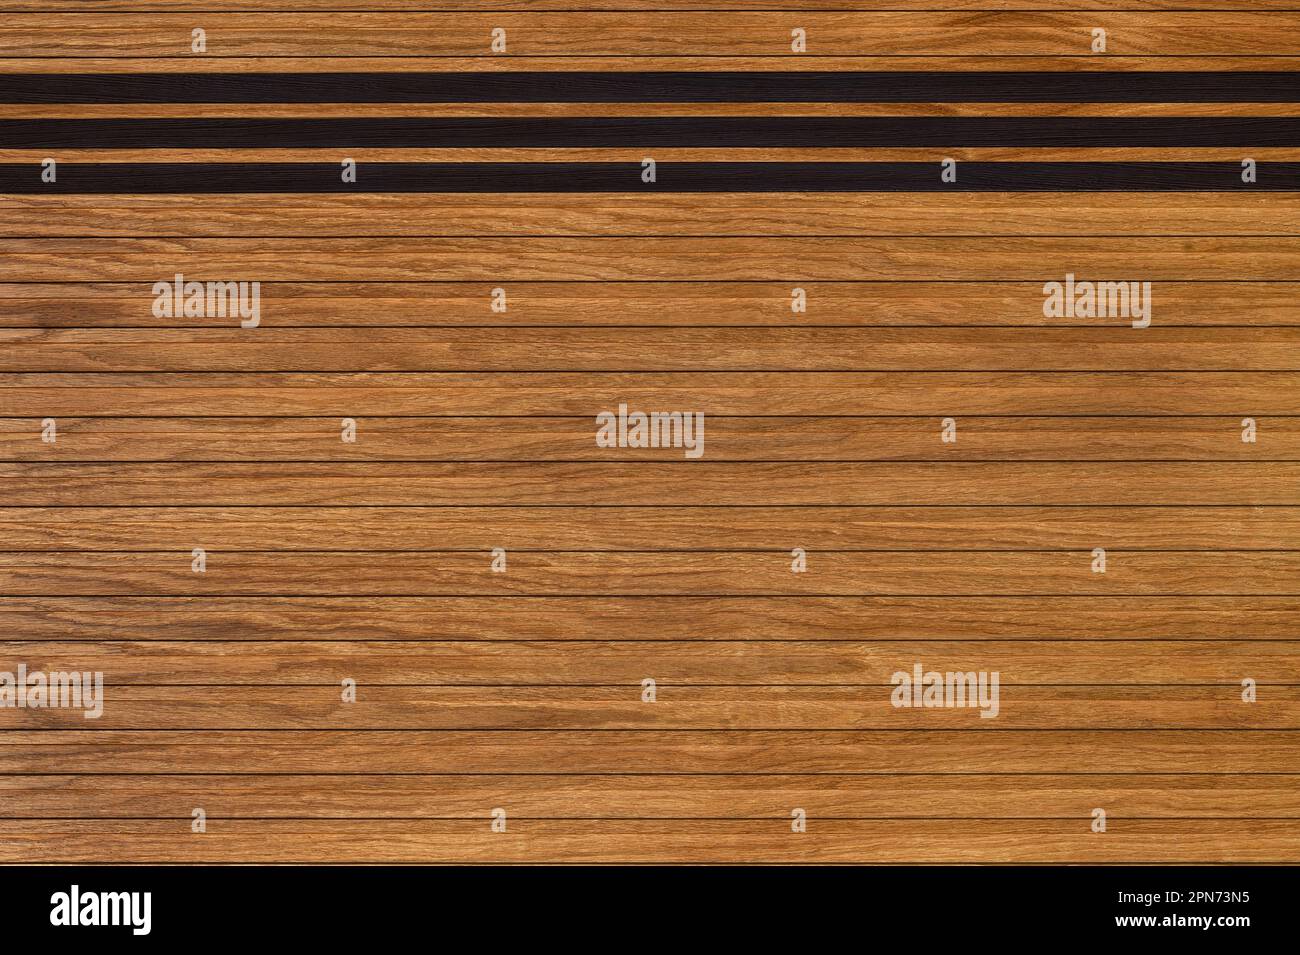 Texture and background of neatly horizontally laid wooden slats with pronounced dark linear planks. Stock Photo